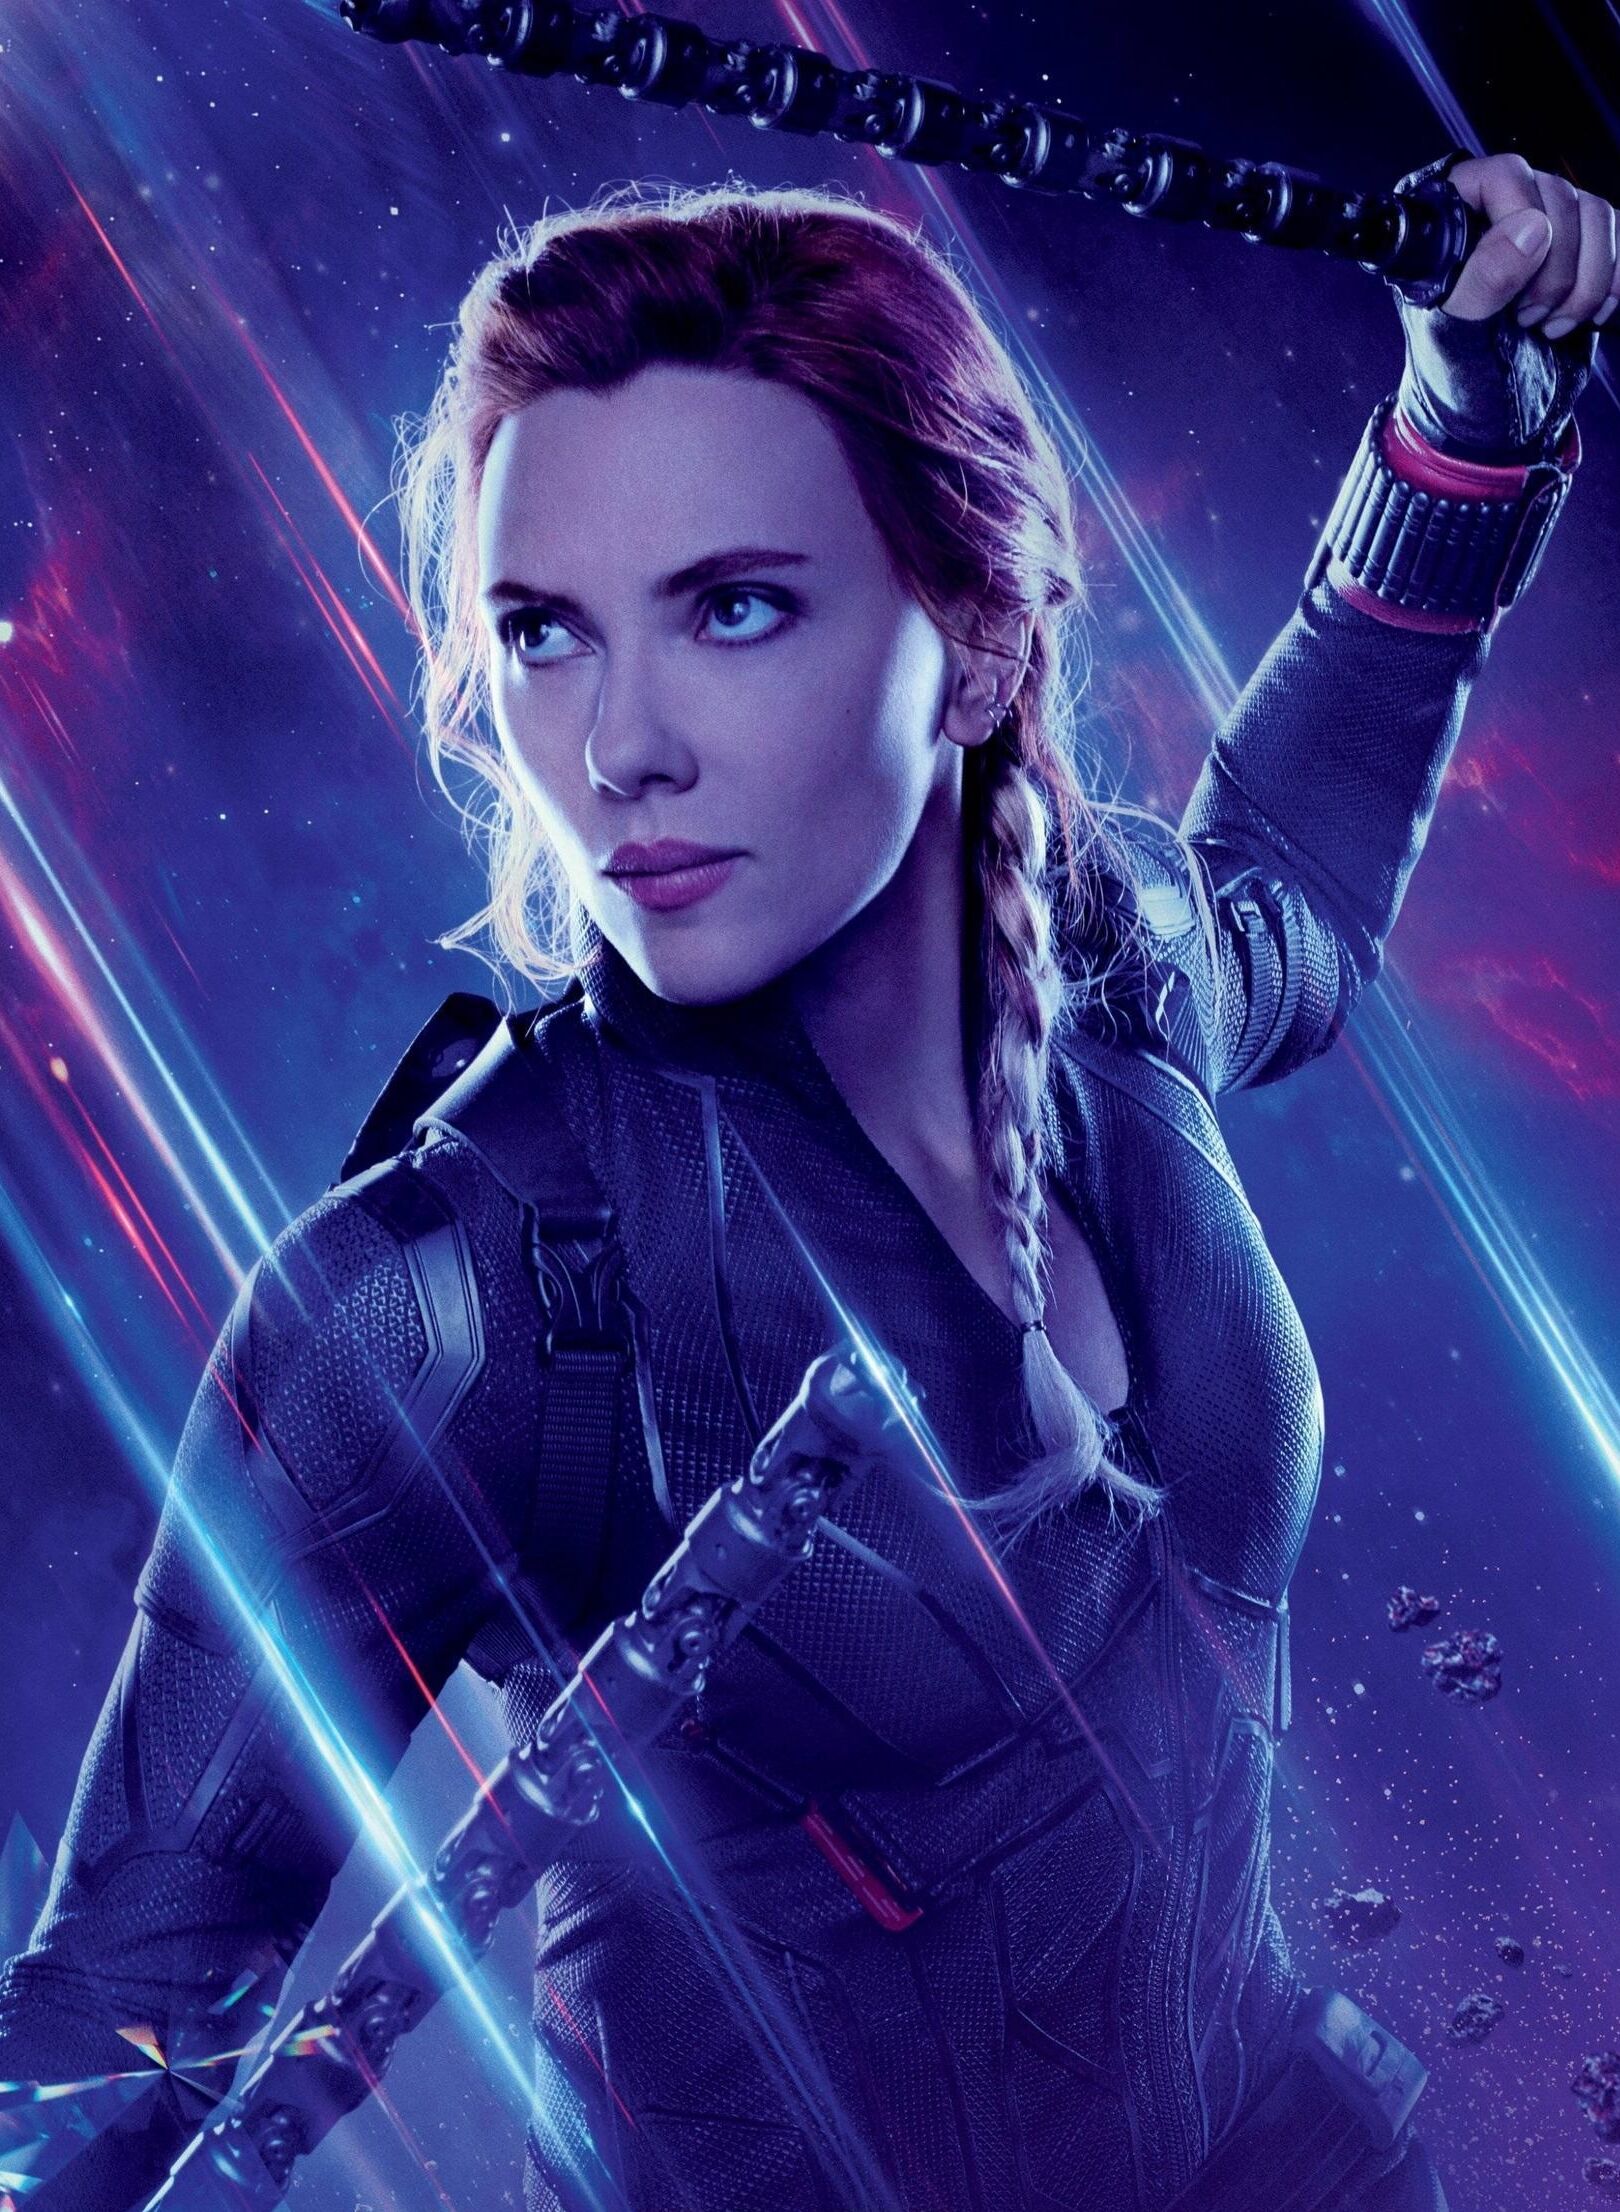 Further details from the Black Widow released footage